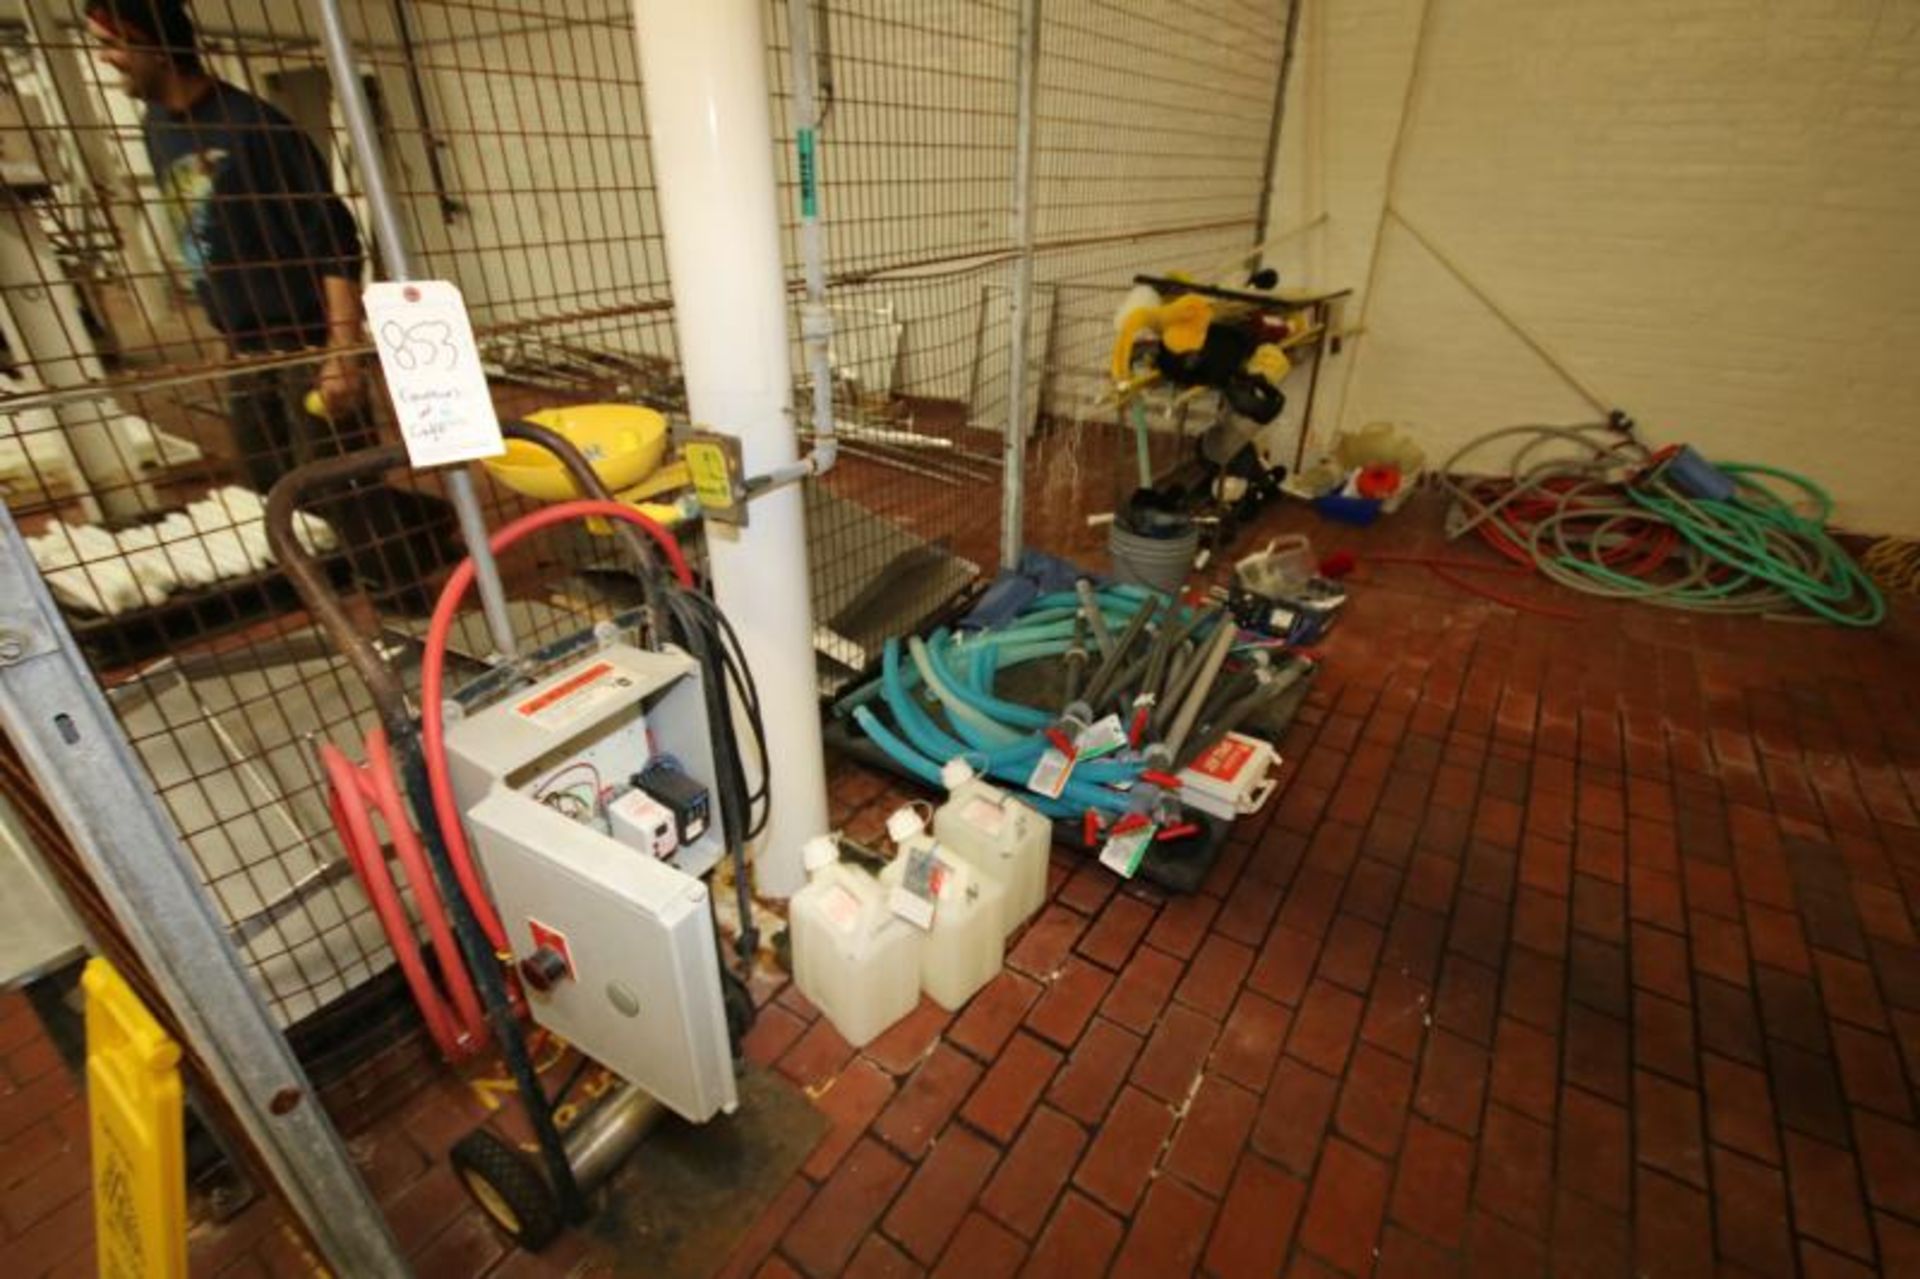 Contents of Cage including Chemical Pumps, Containments, Barrel Pumps, Cleaning Brushes, Hose (NOTE: